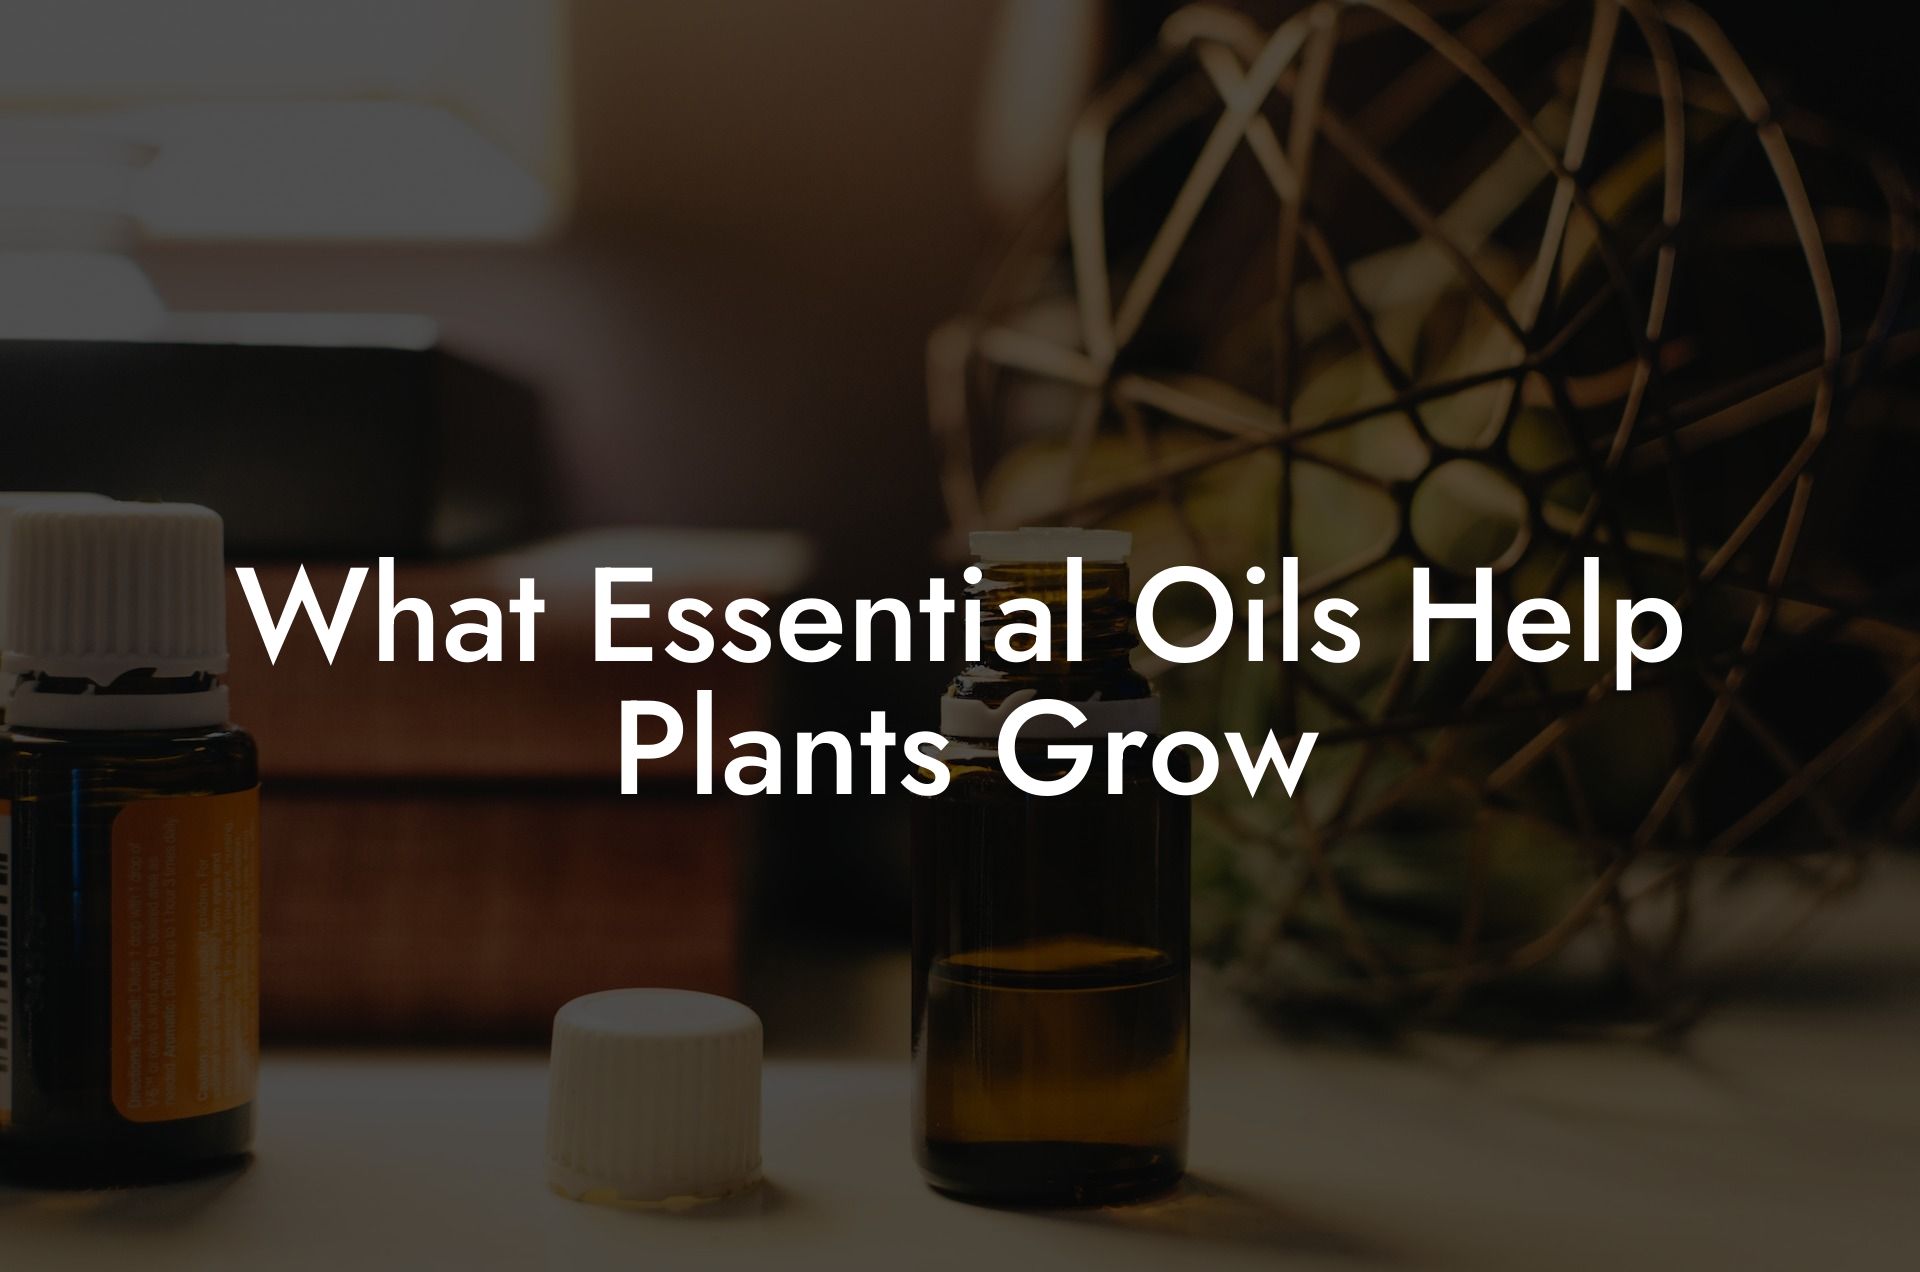 What Essential Oils Help Plants Grow